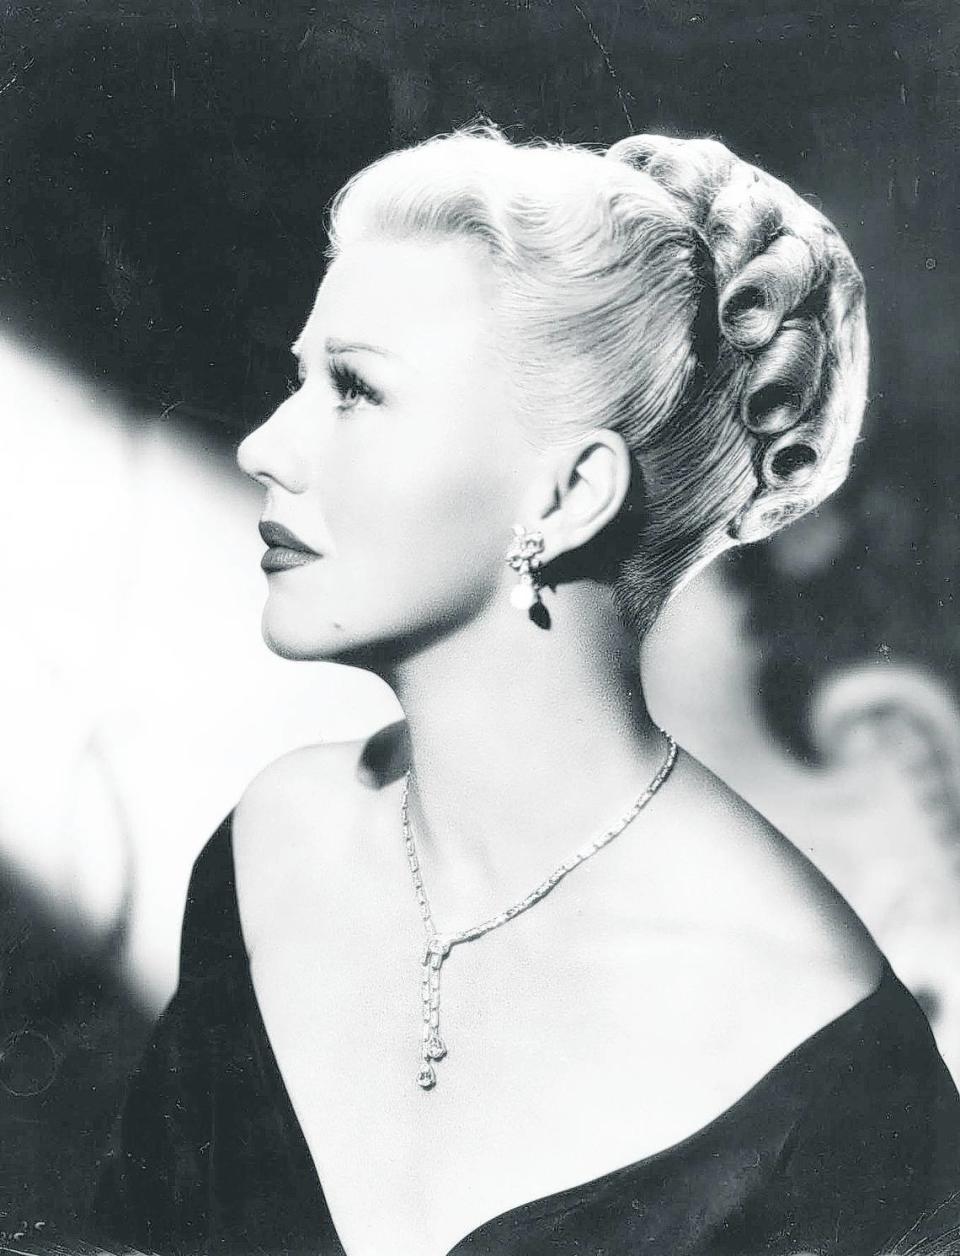 Ginger Rogers won the b​est a​ctress Oscar for “Kitty Foyle” in 1941. She was born in a small house in Independence in 1911.